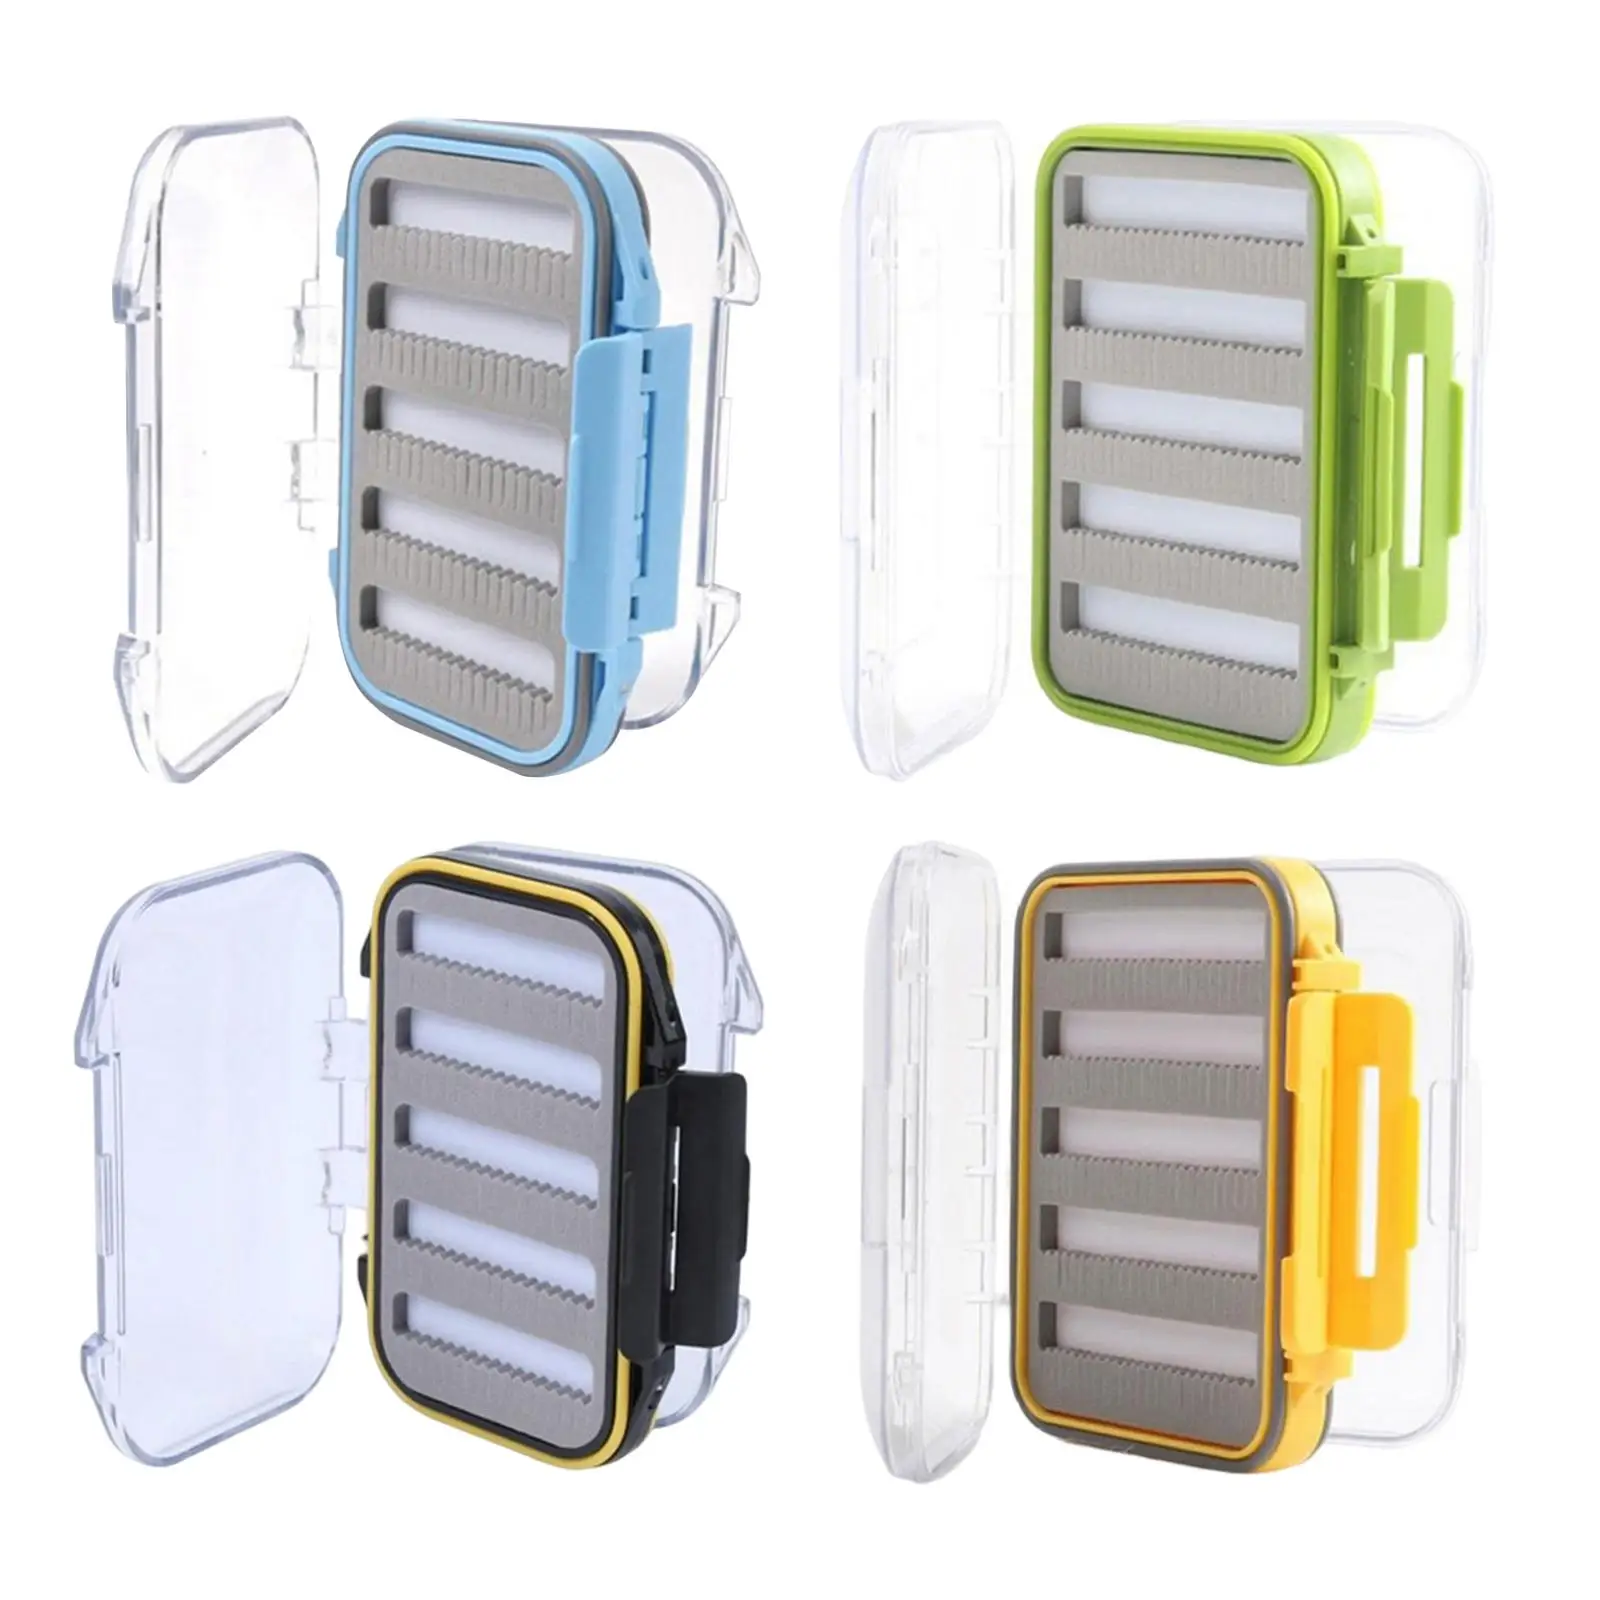 Fly Fishing  Box 7.6x3.3x10.4cm Elegant Professional Light Weight Two Sided Easy Grip Transparent Lid Durable Accessories